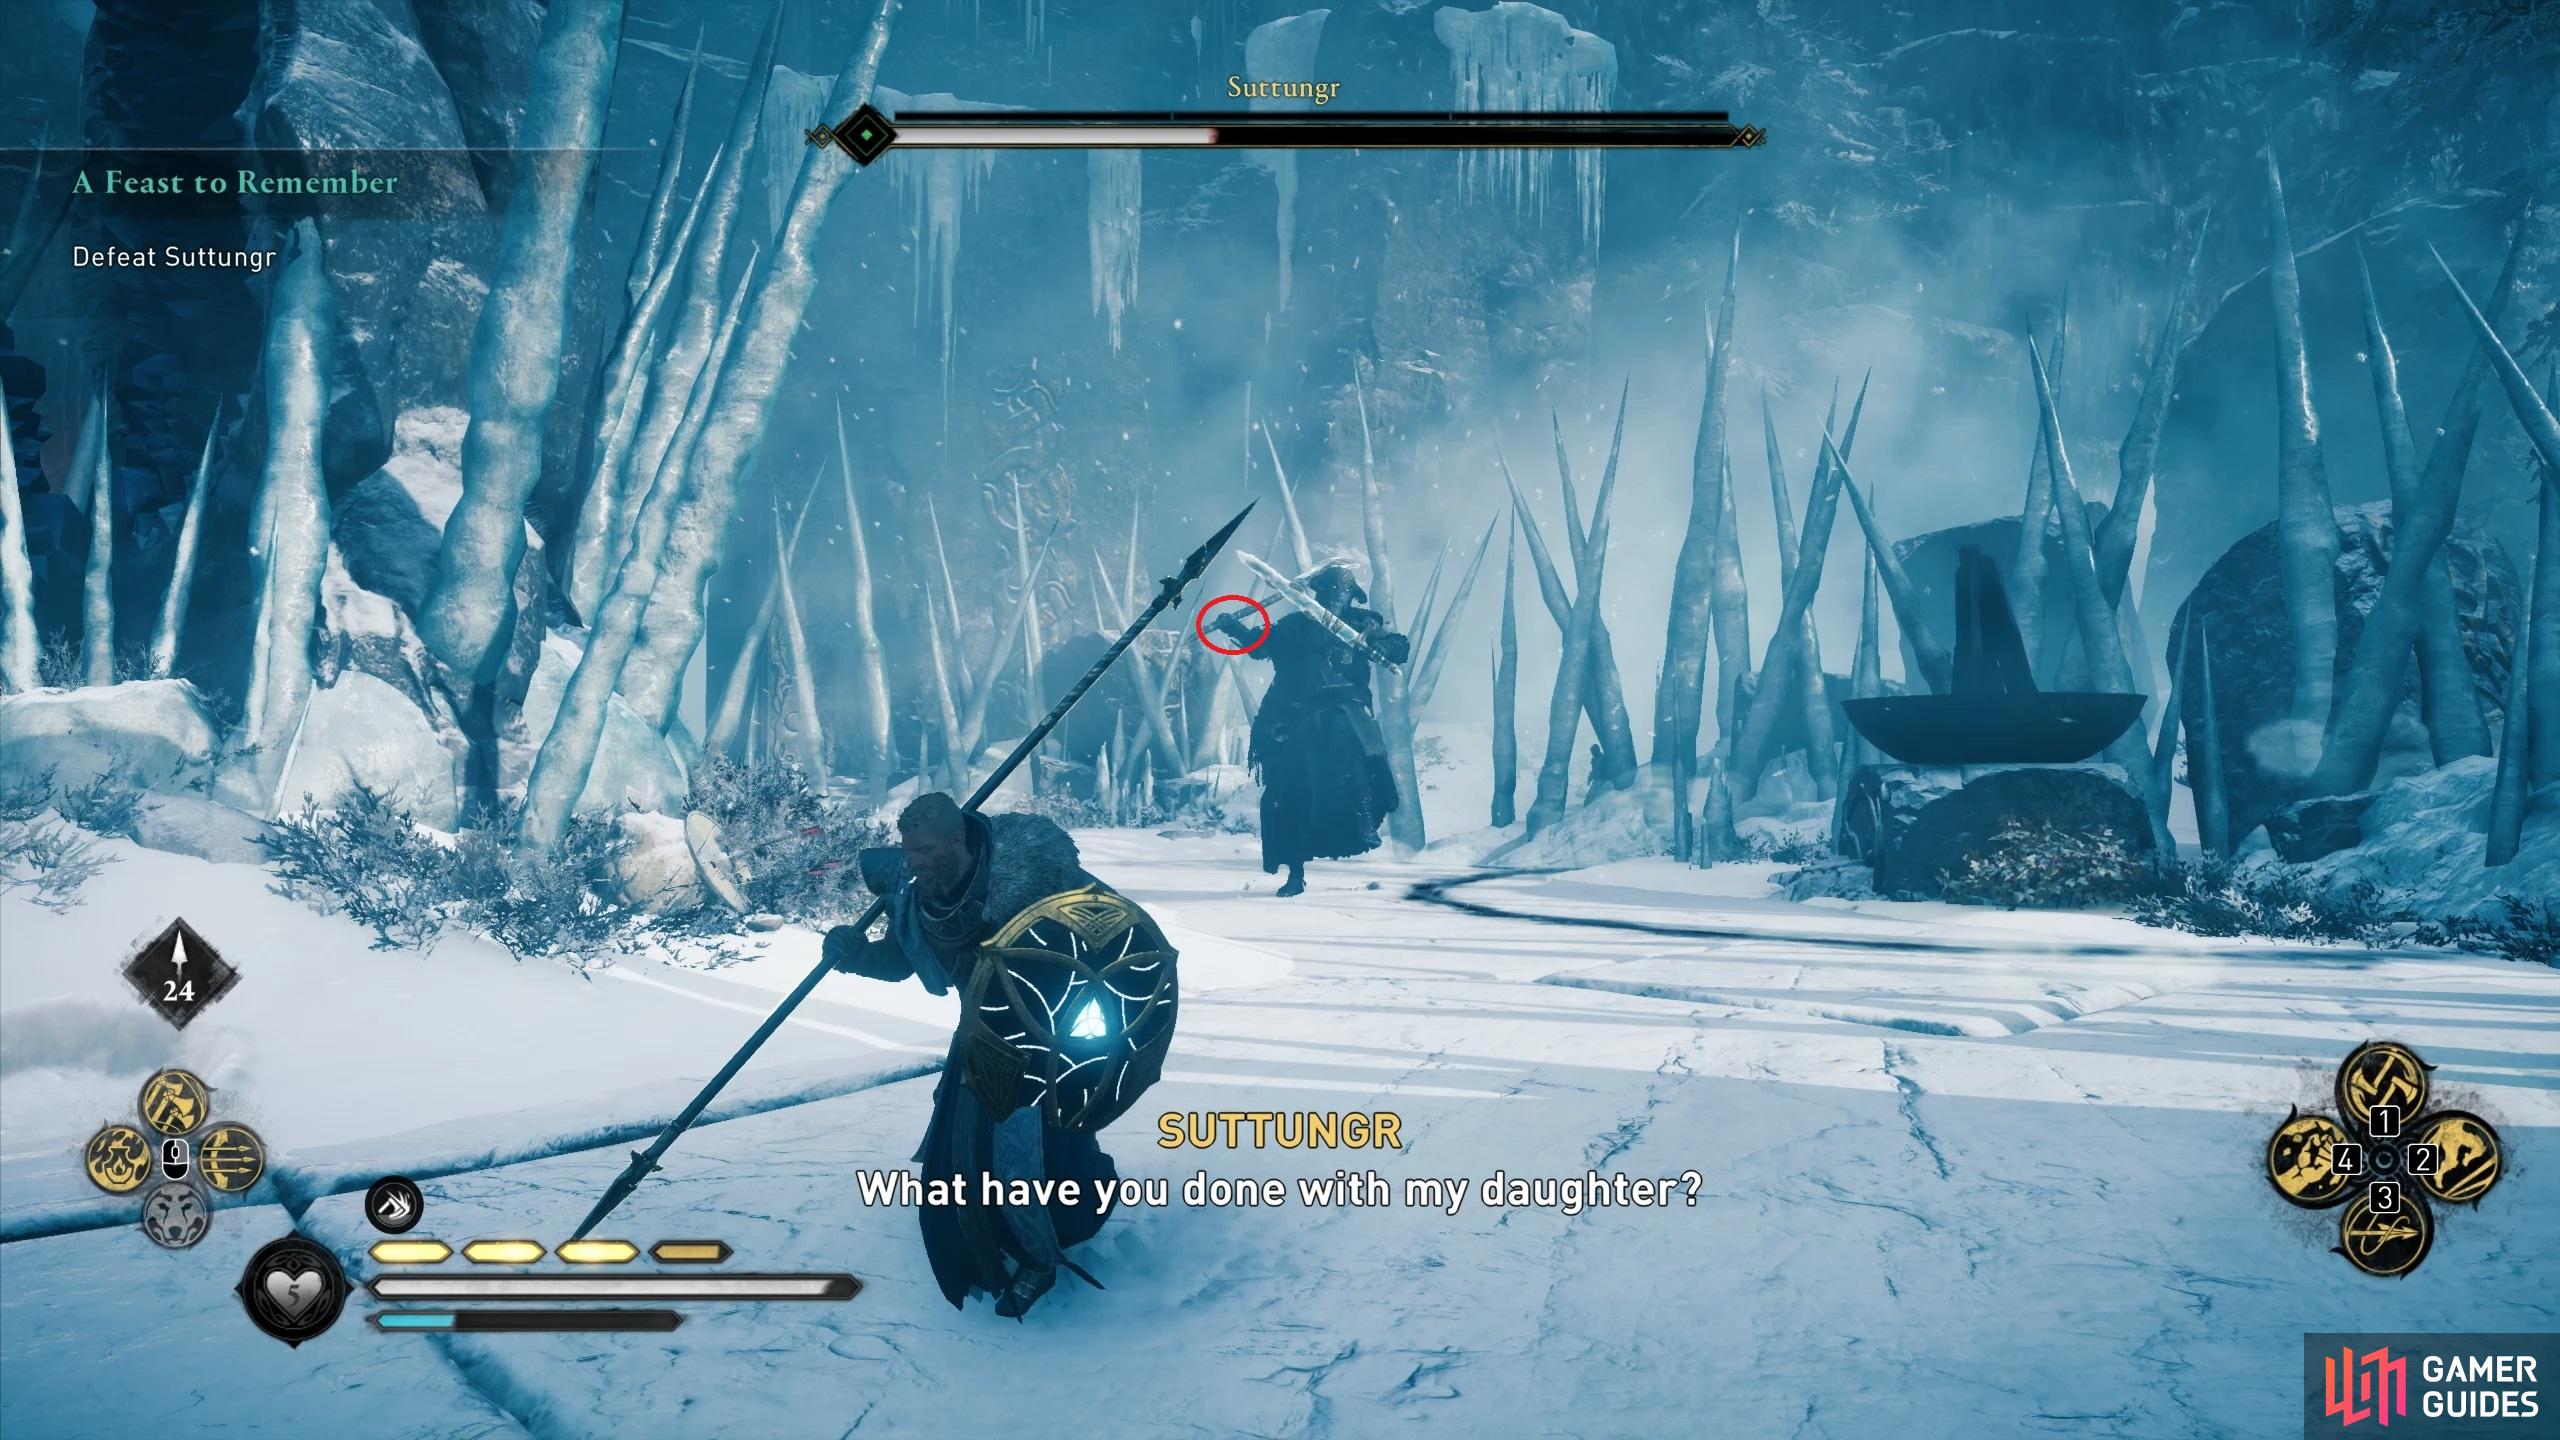 The only indication of when Suttungr will throw an ice projectile is from seeing his right arm raised.